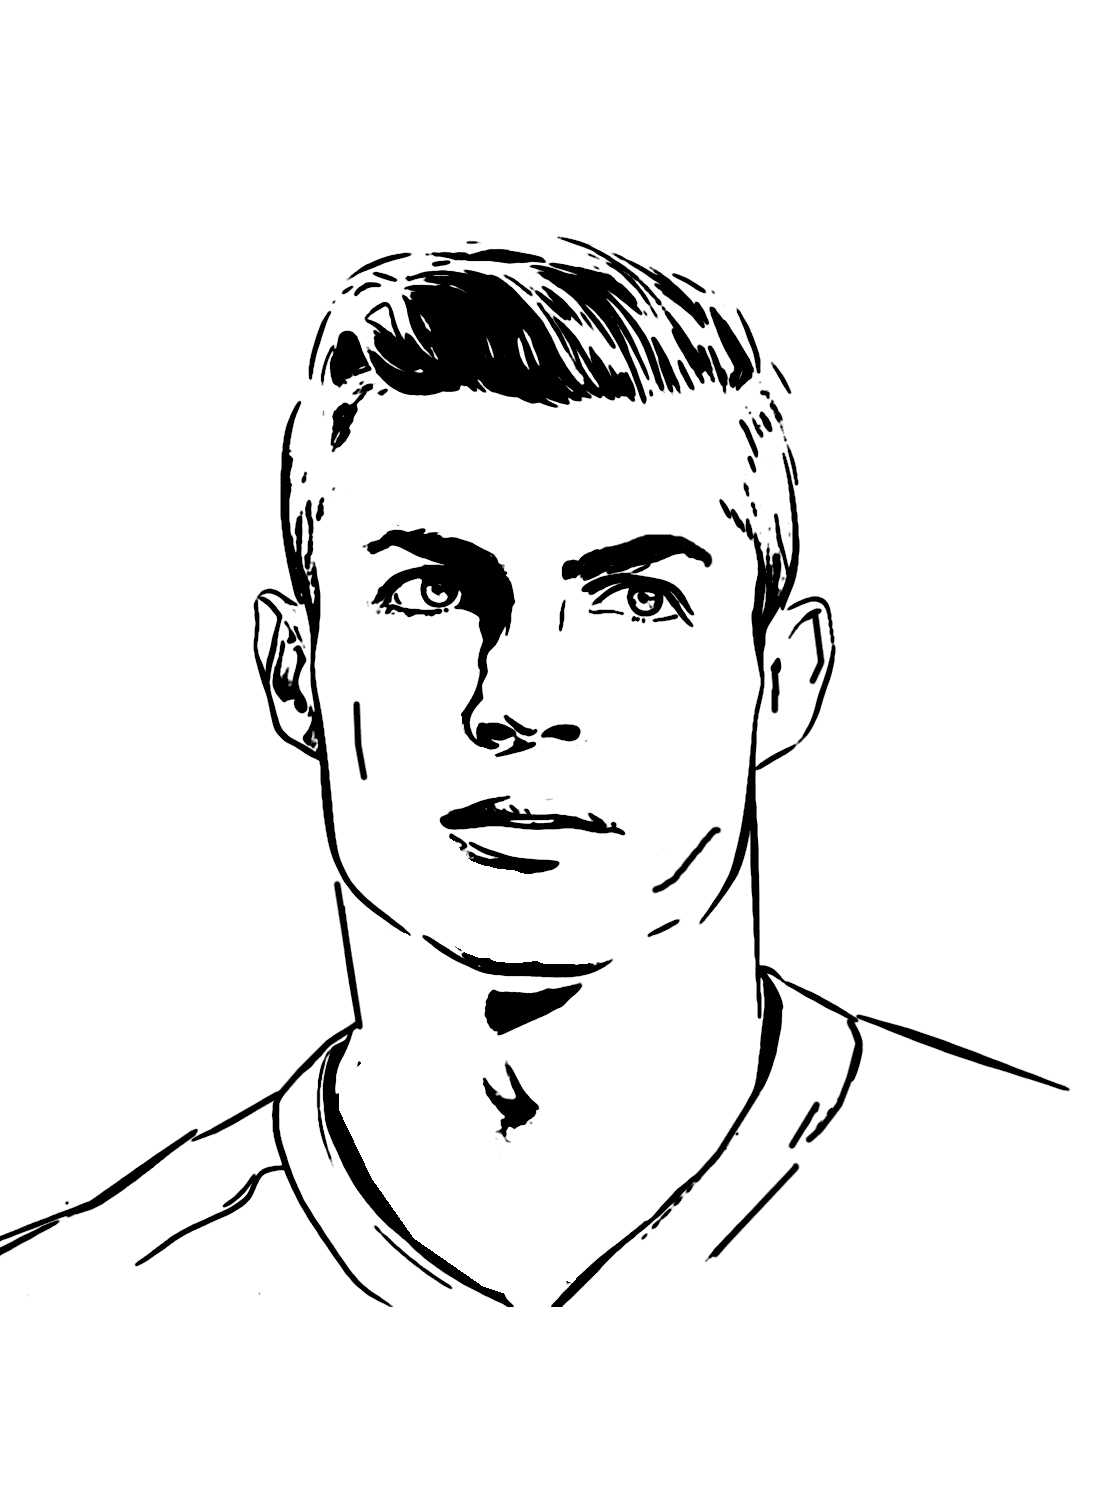 Cristiano Ronaldo Coloring Pages - Coloring Pages For Kids And Adults